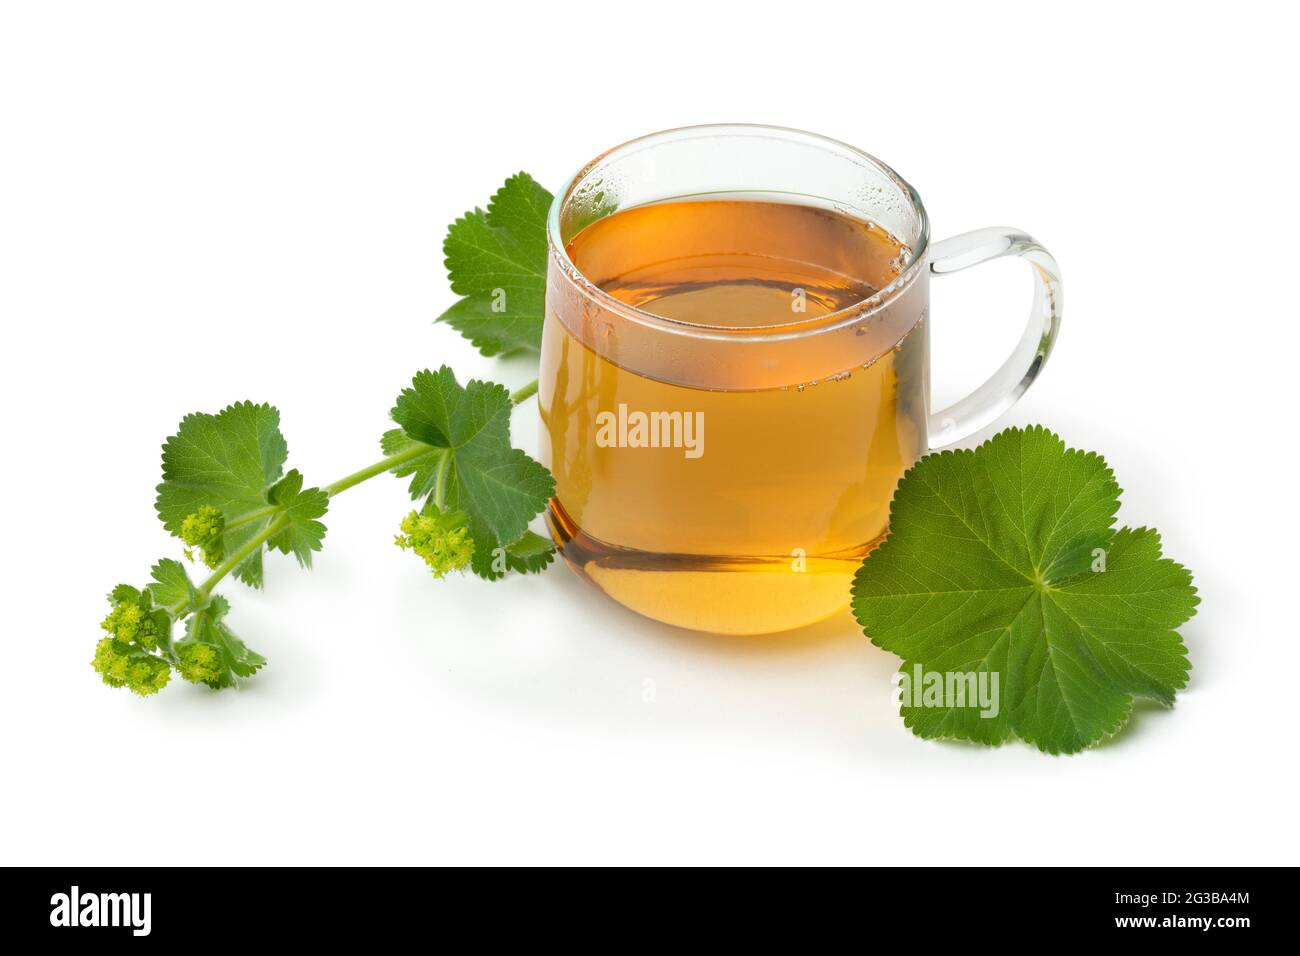 Fresh twig of Lady's mantle and a glass of tea close up isolated on white background Stock Photo